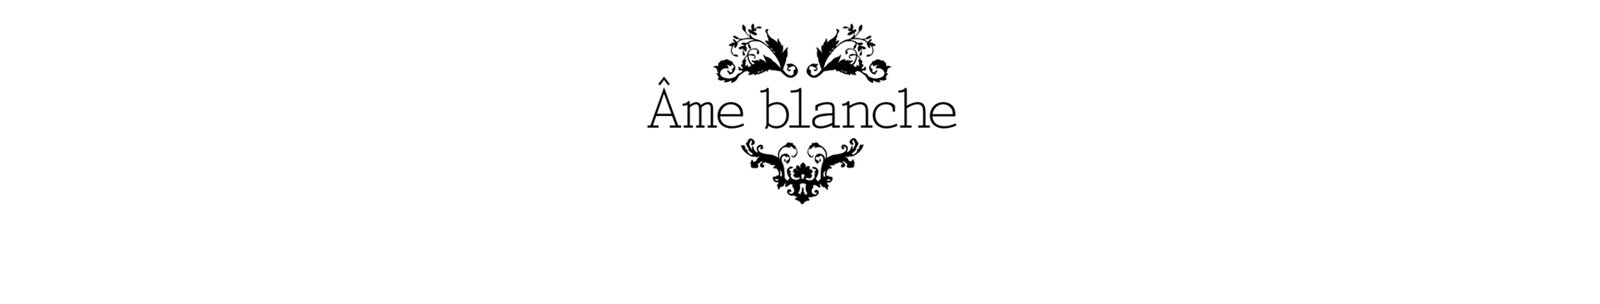 Ame blanche アームブランシュ Online Shop